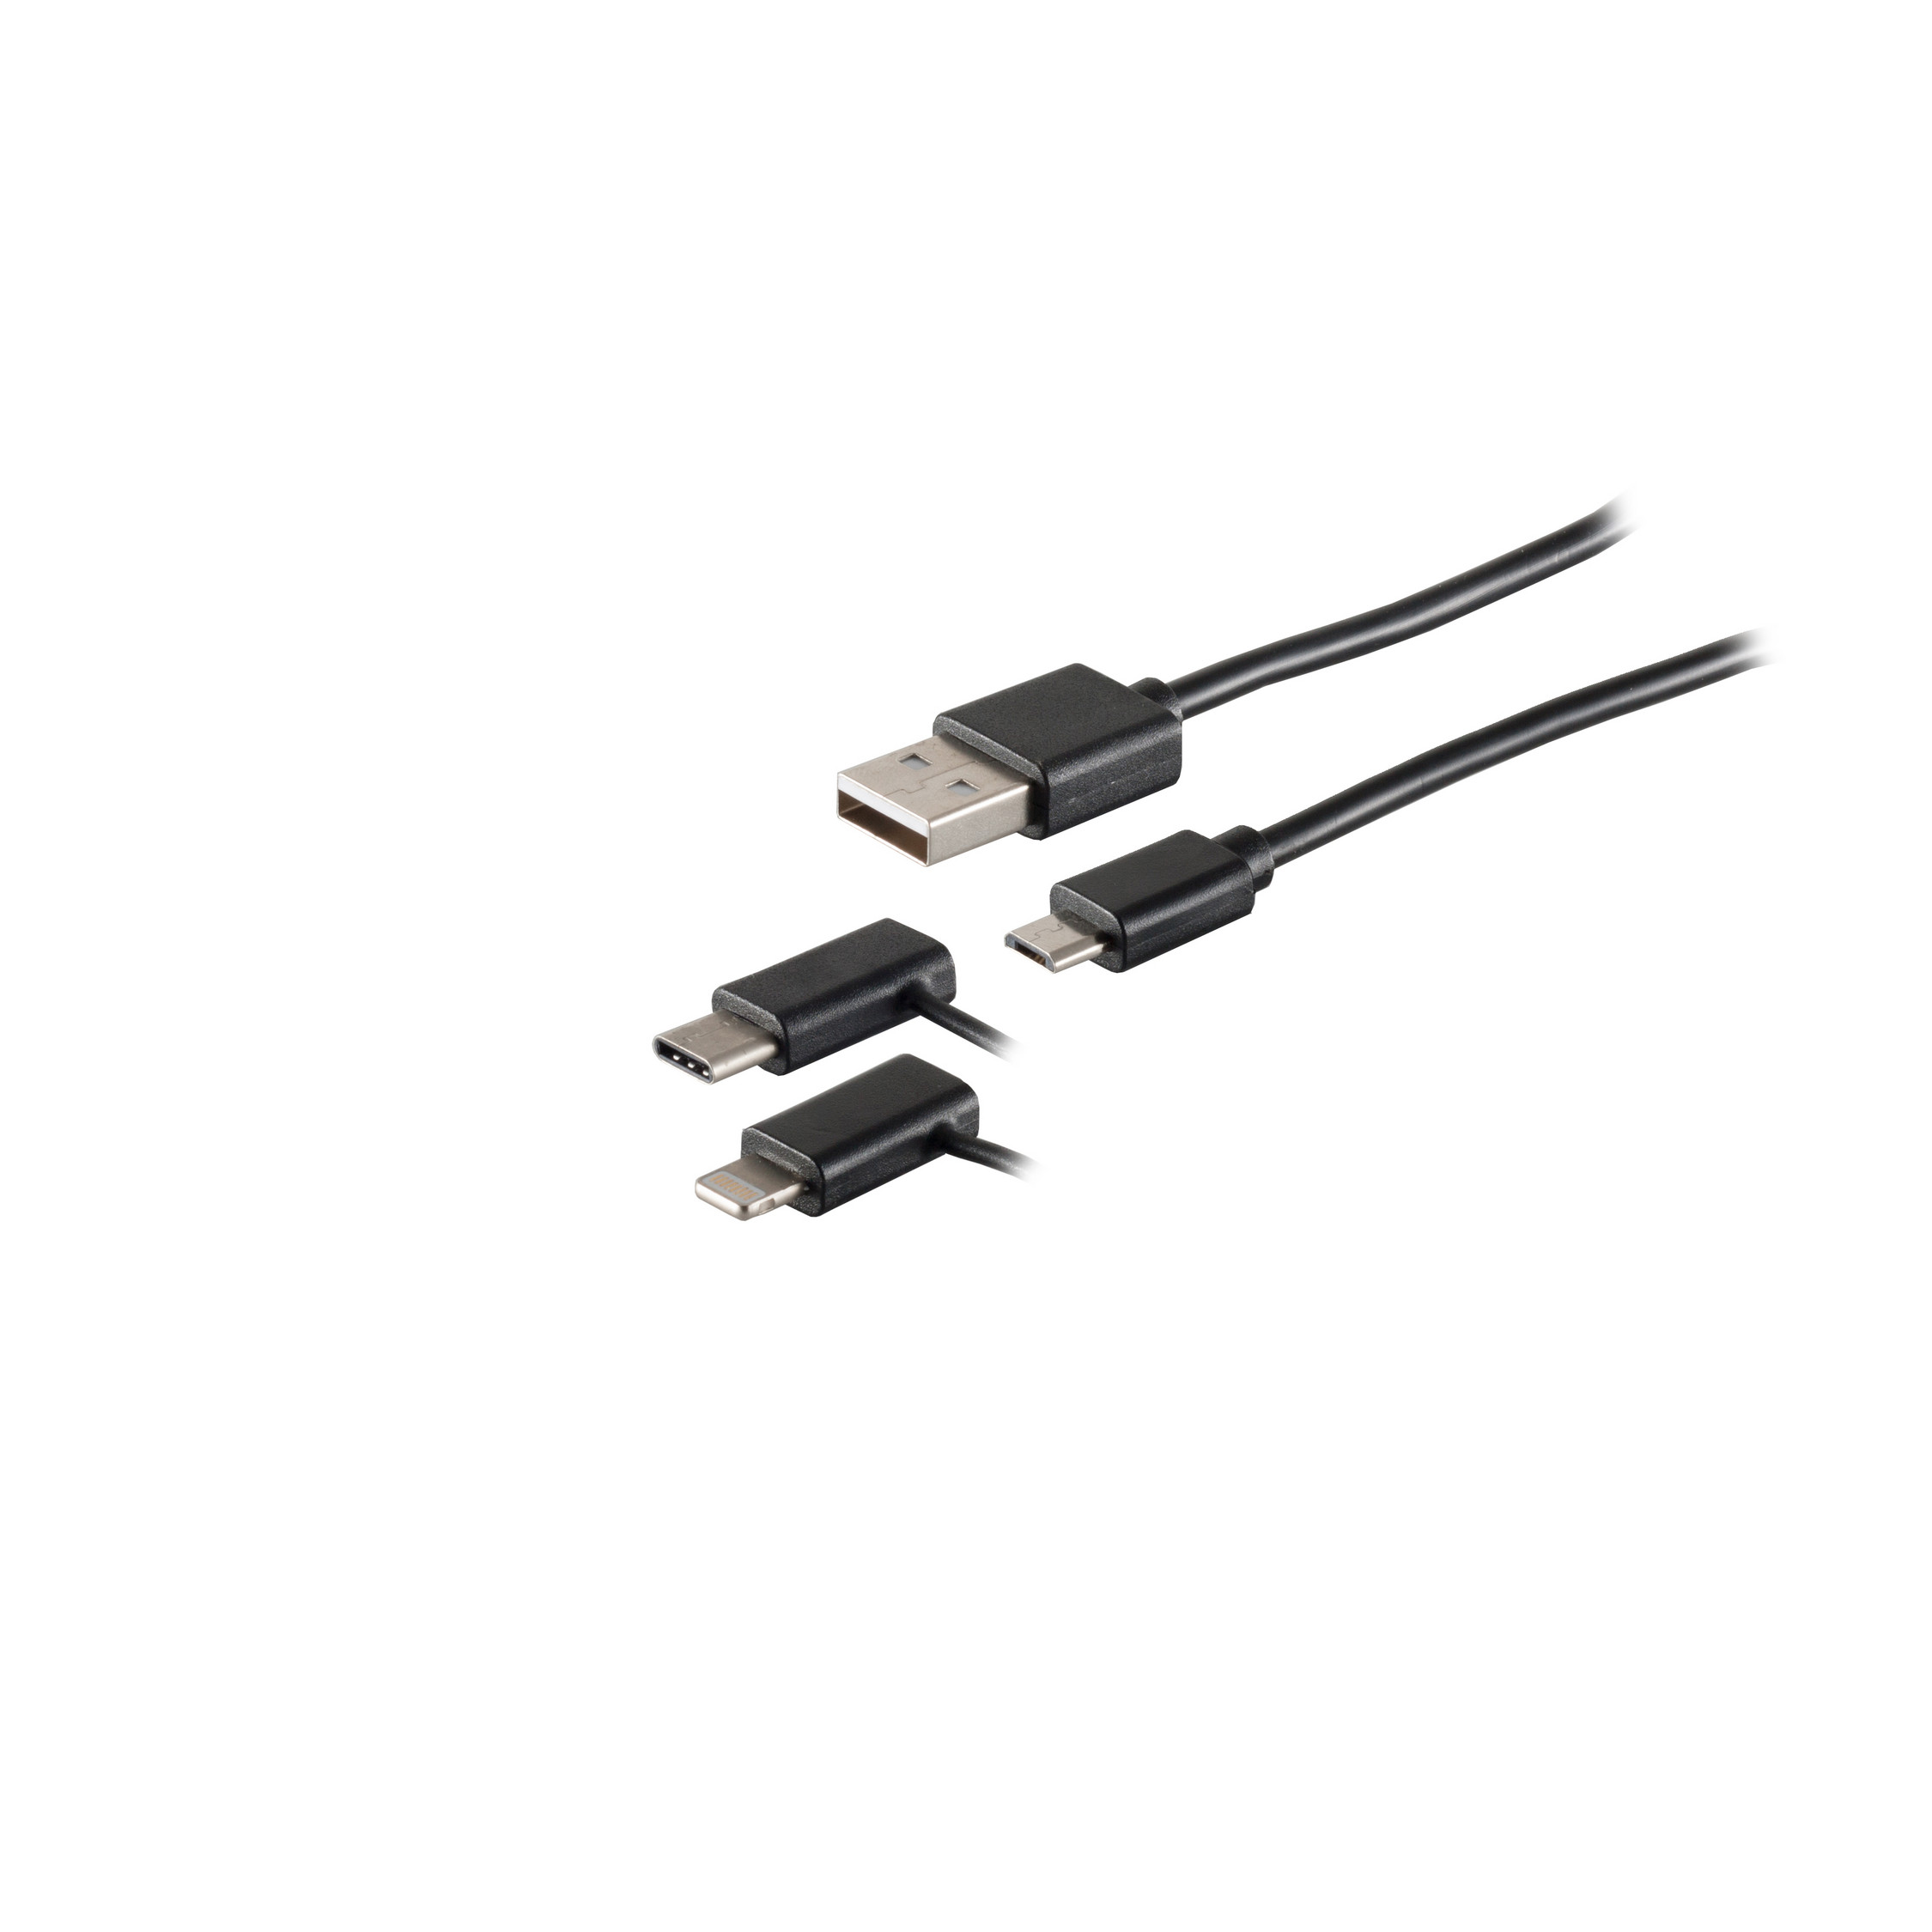 S/CONN MAXIMUM CONNECTIVITY Kabel USB 3in1 USB C/8-pin Micro/Typ St.1m Kabel Lade-Sync